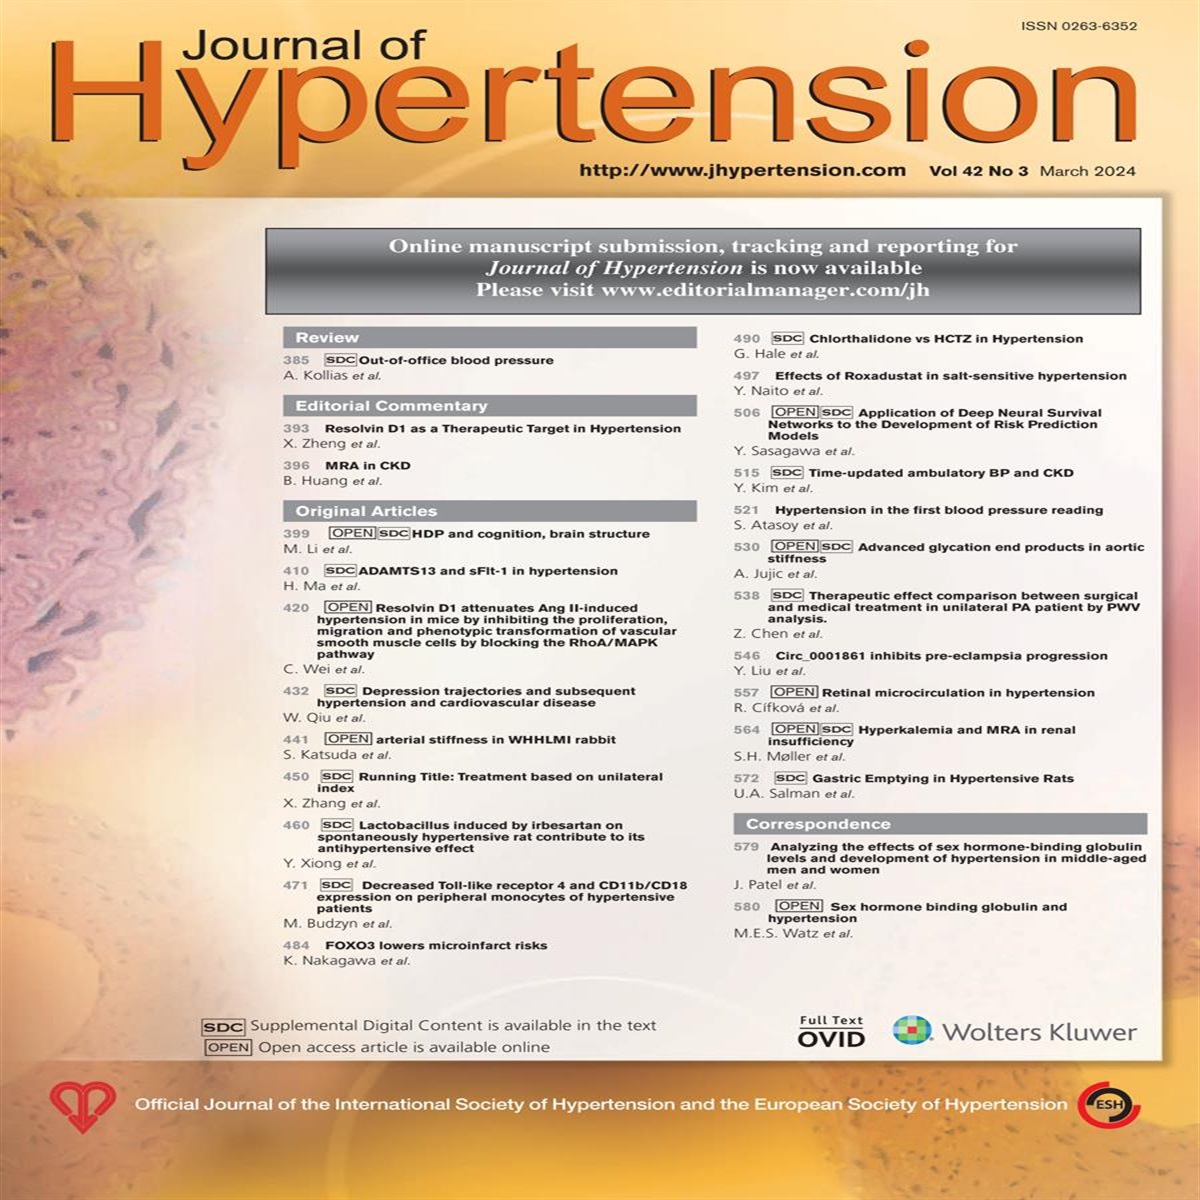 Reply on: Analyzing the effects of sex hormone-binding globulin levels and development of hypertension in middle-aged men and women